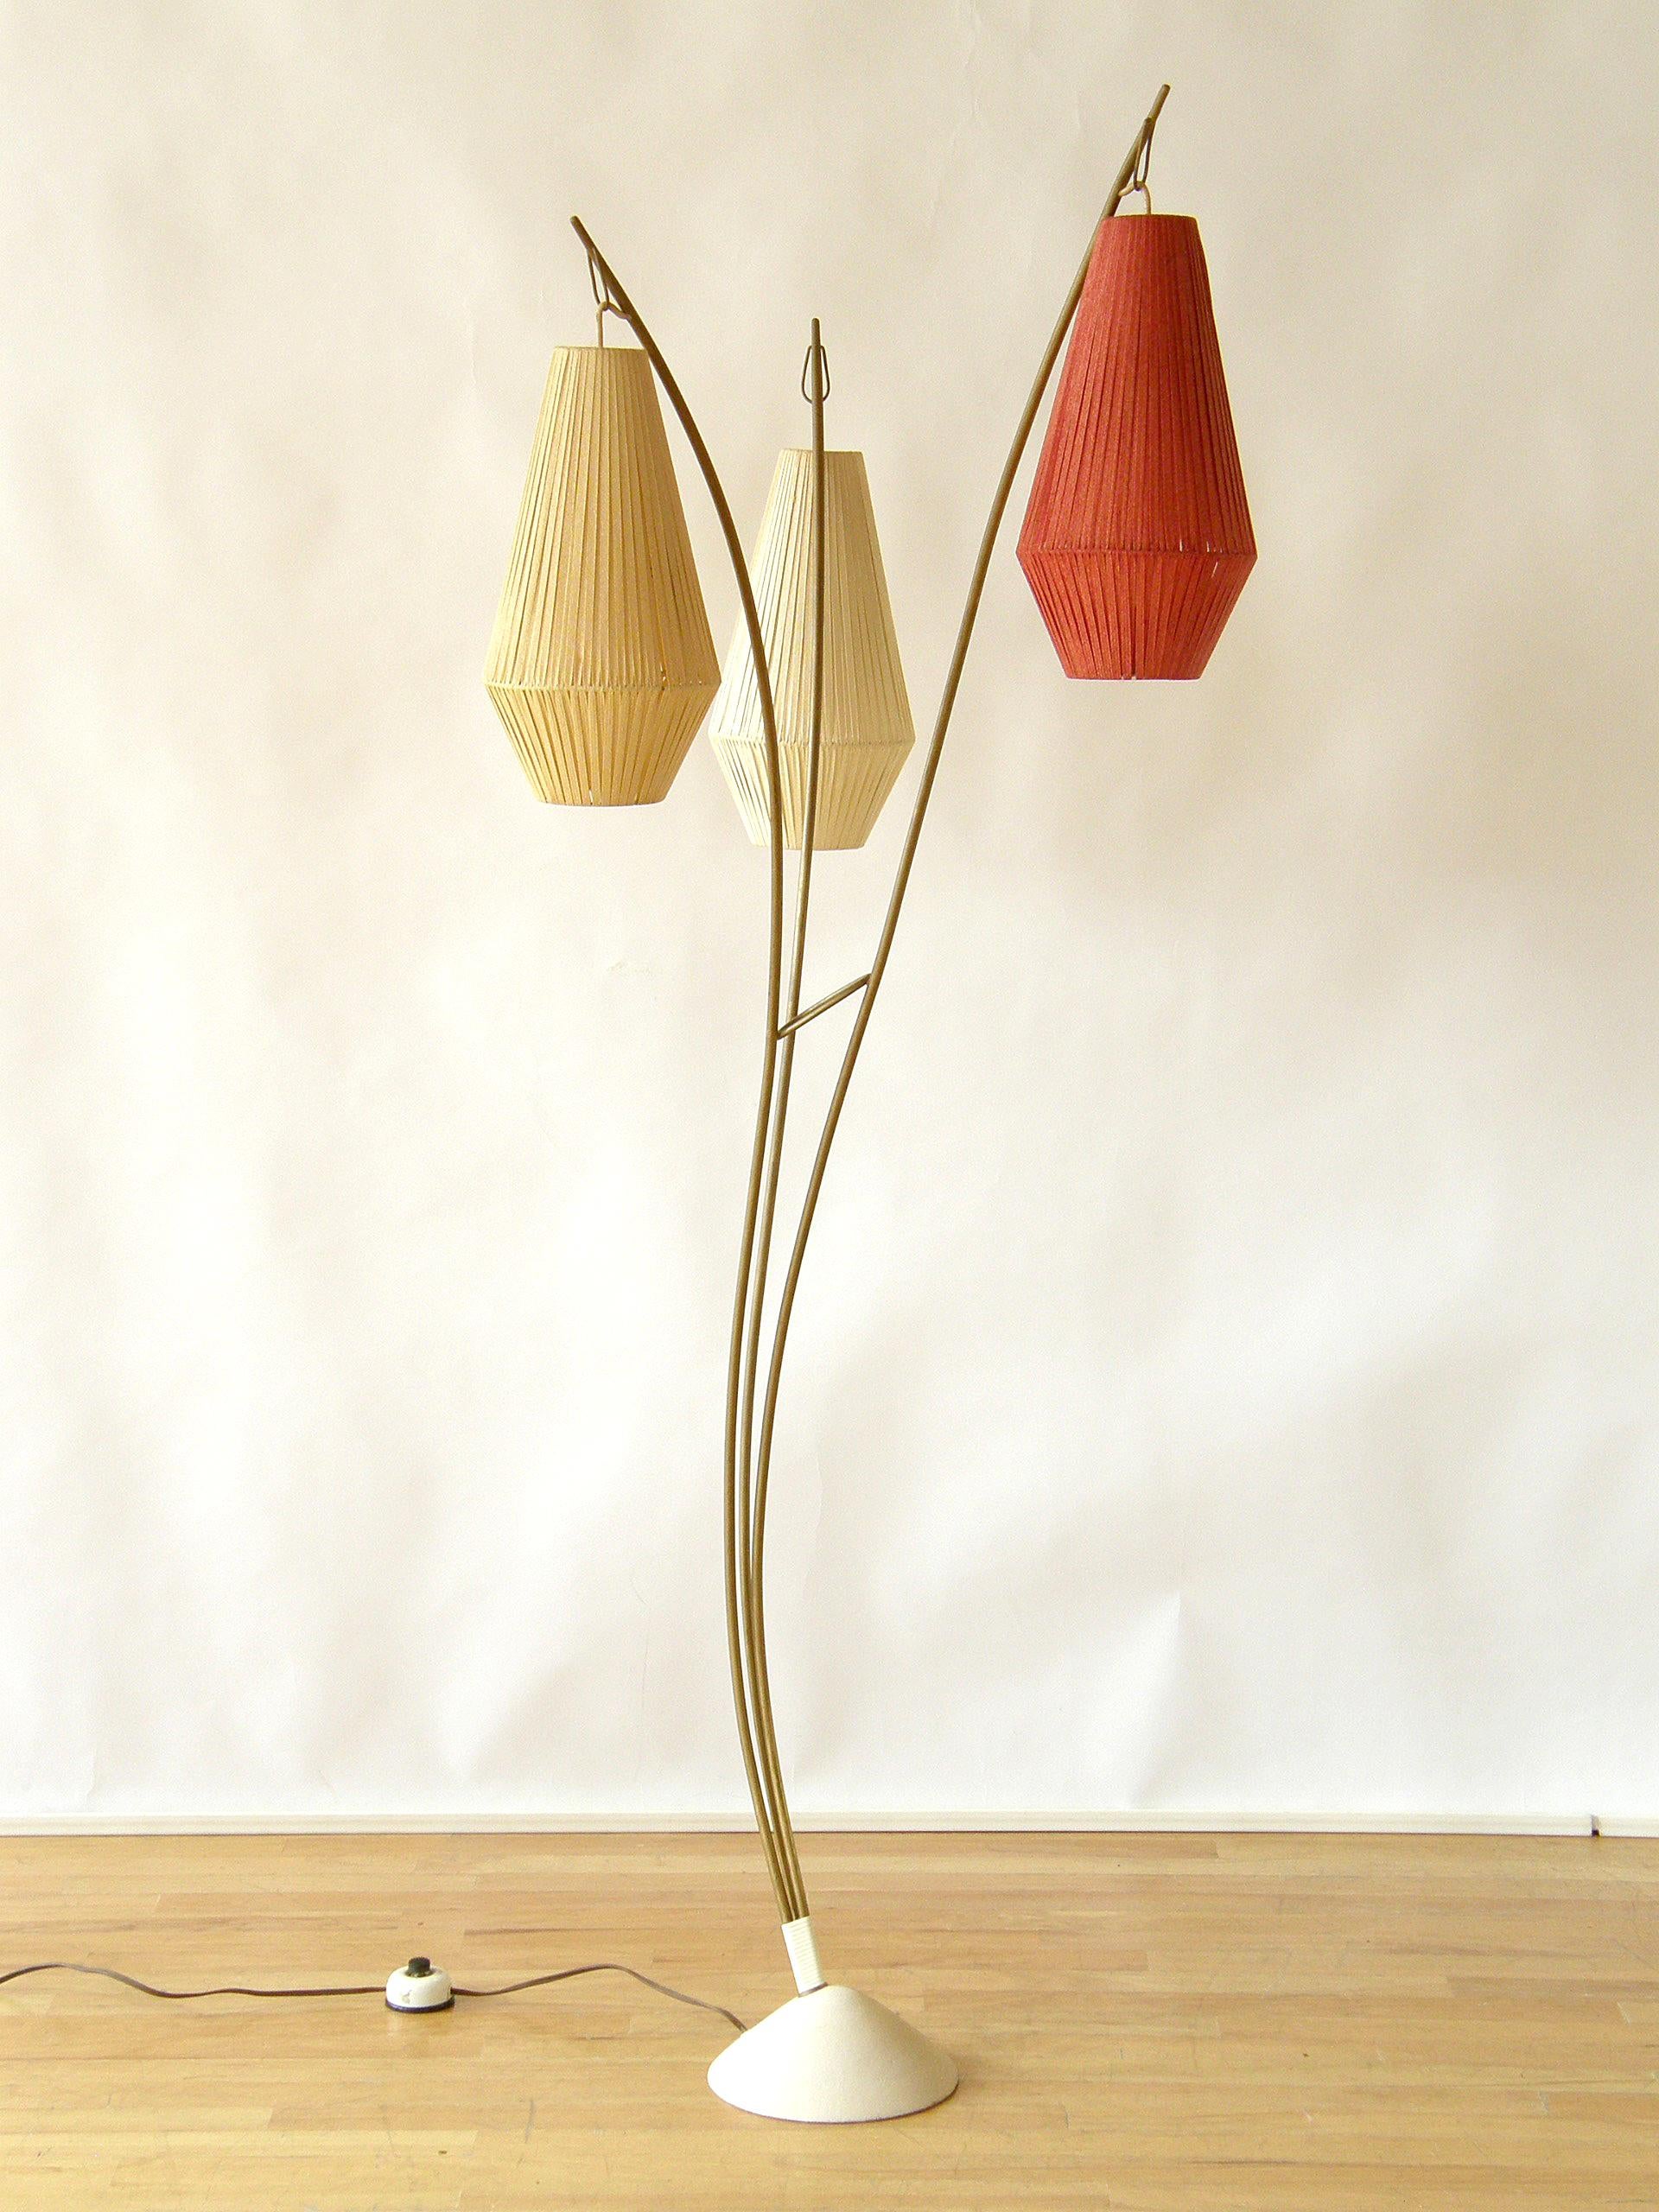 Mid-Century Modern Floor Lamp with Three Curved Arms and Lantern Shaped Woven Ribbon Shades